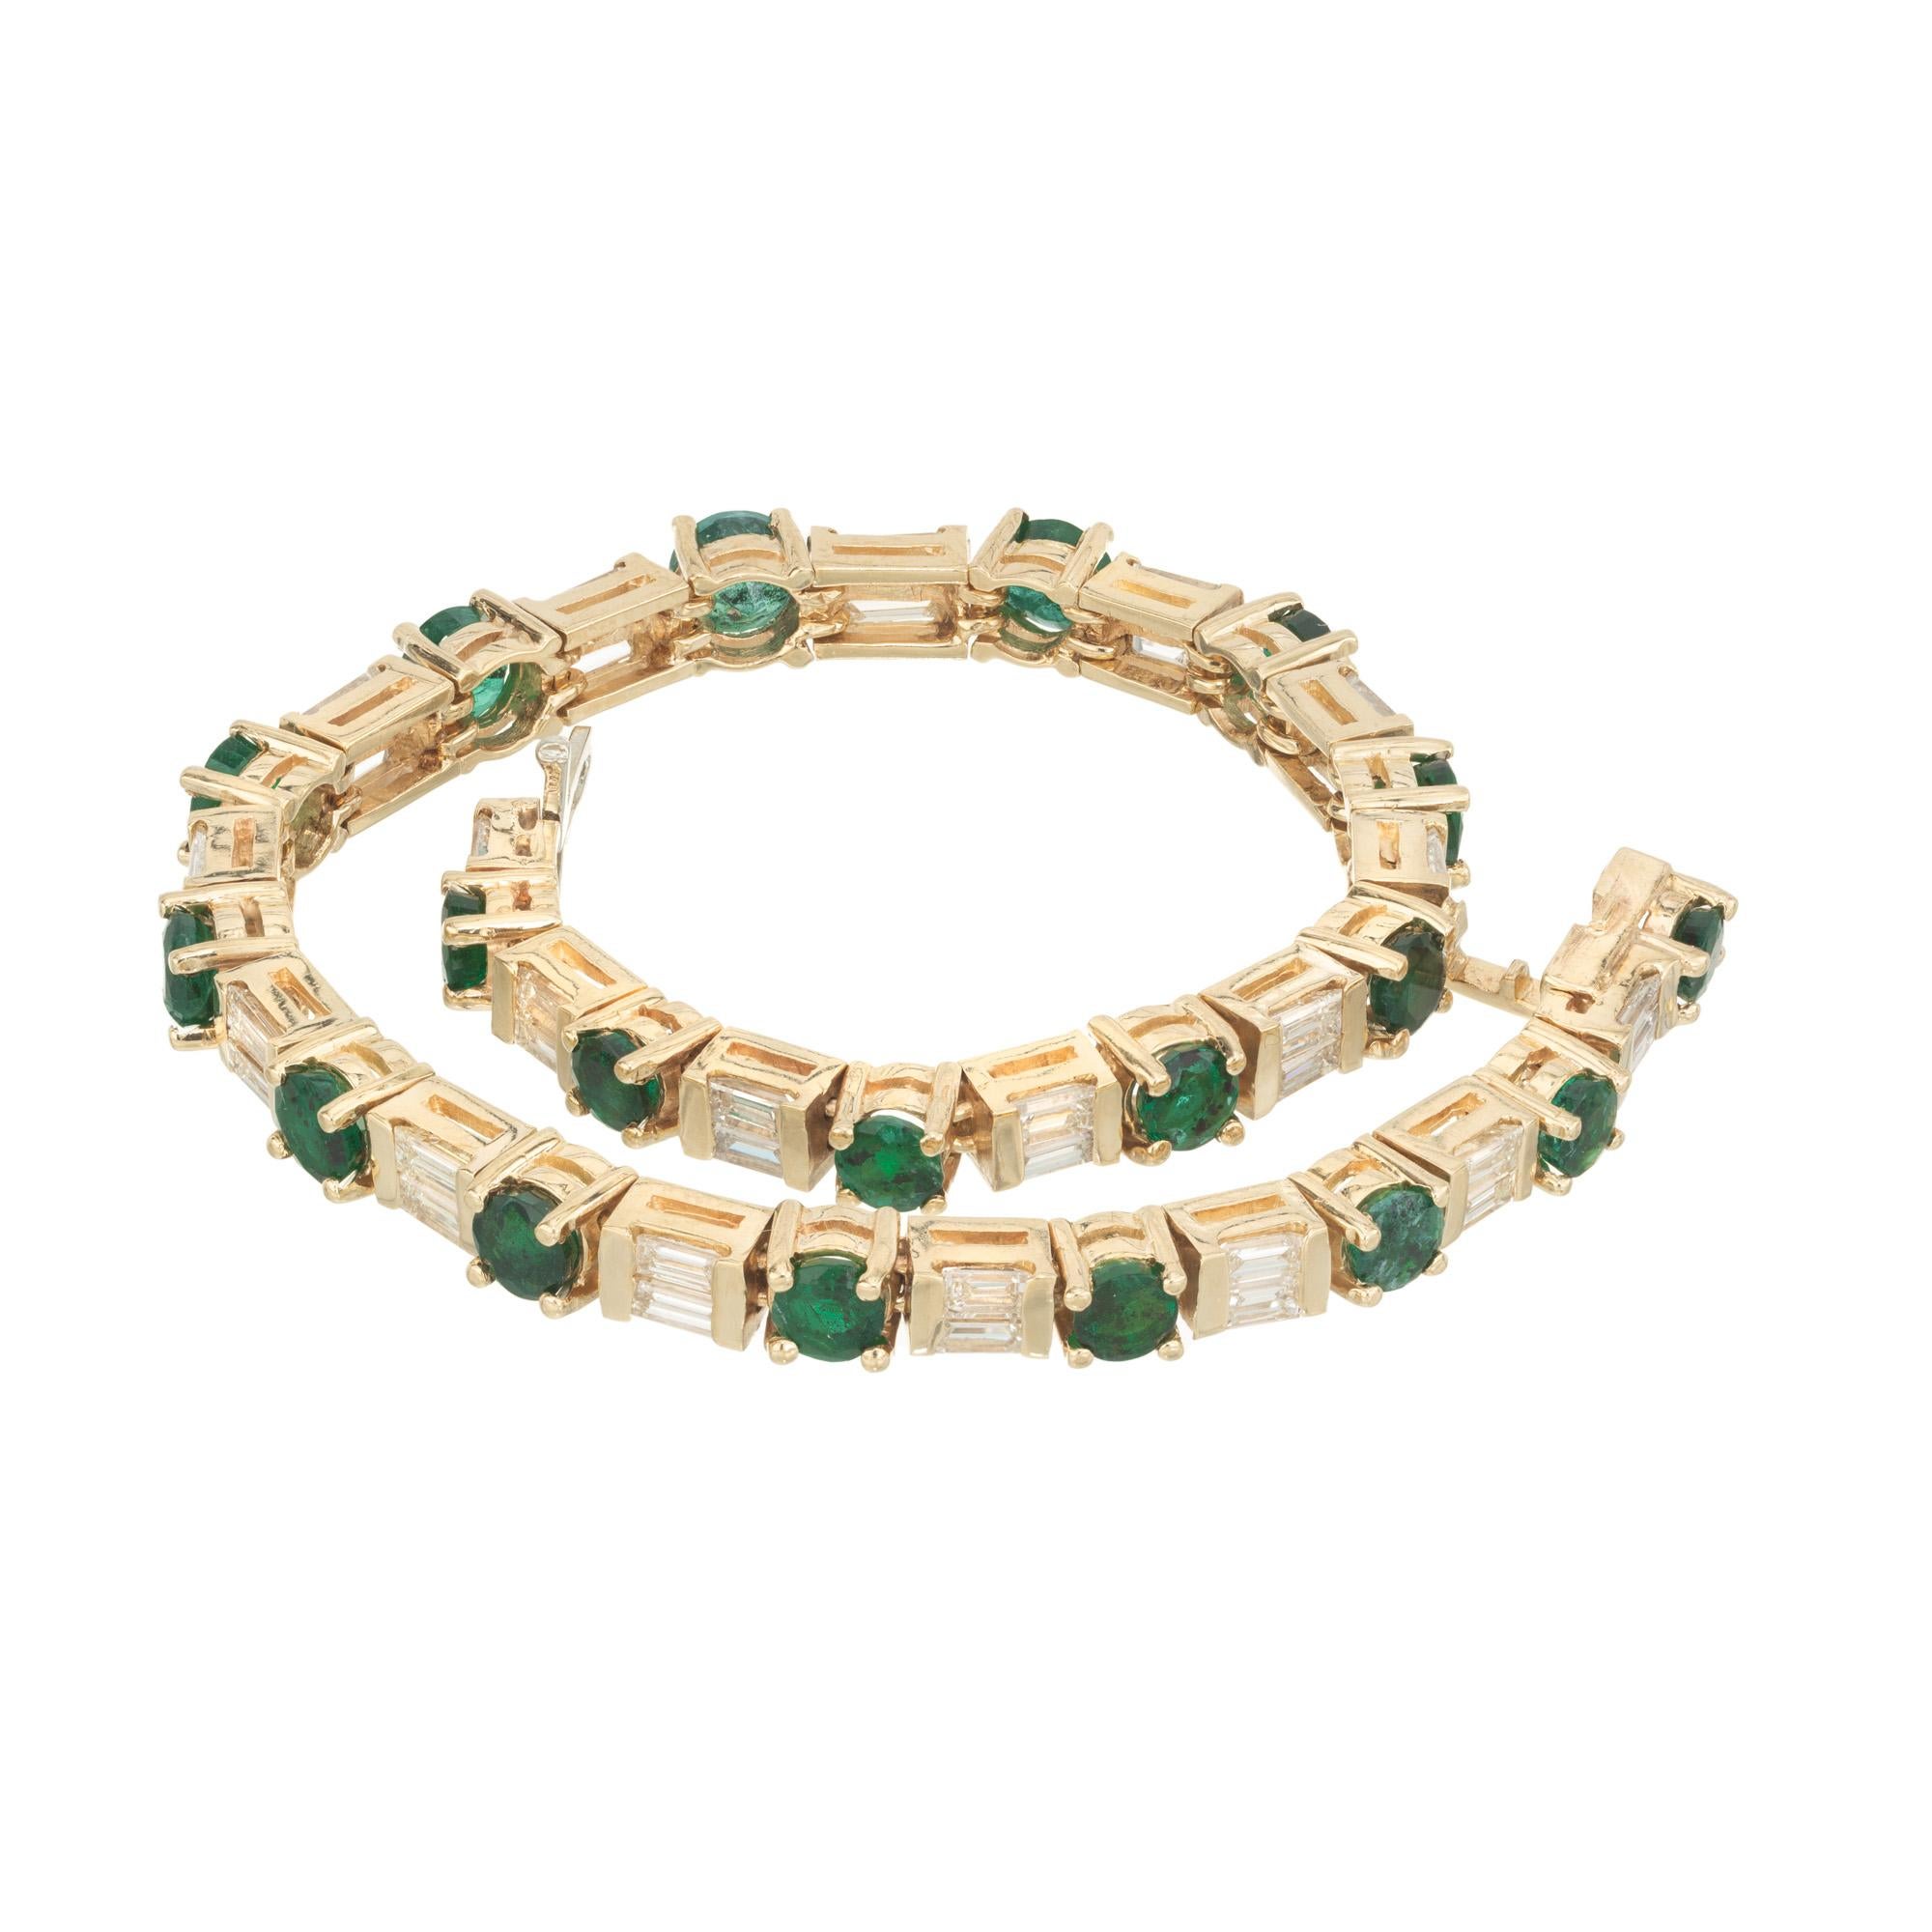 Rich green Brazilian emerald baguette diamond tennis gold bracelet. This bracelet features a stunning 4.40cts of round green Brazilian emeralds as the central gemstone, alternating with 38 baguette cut diamonds. Made from 14k yellow gold, the warm